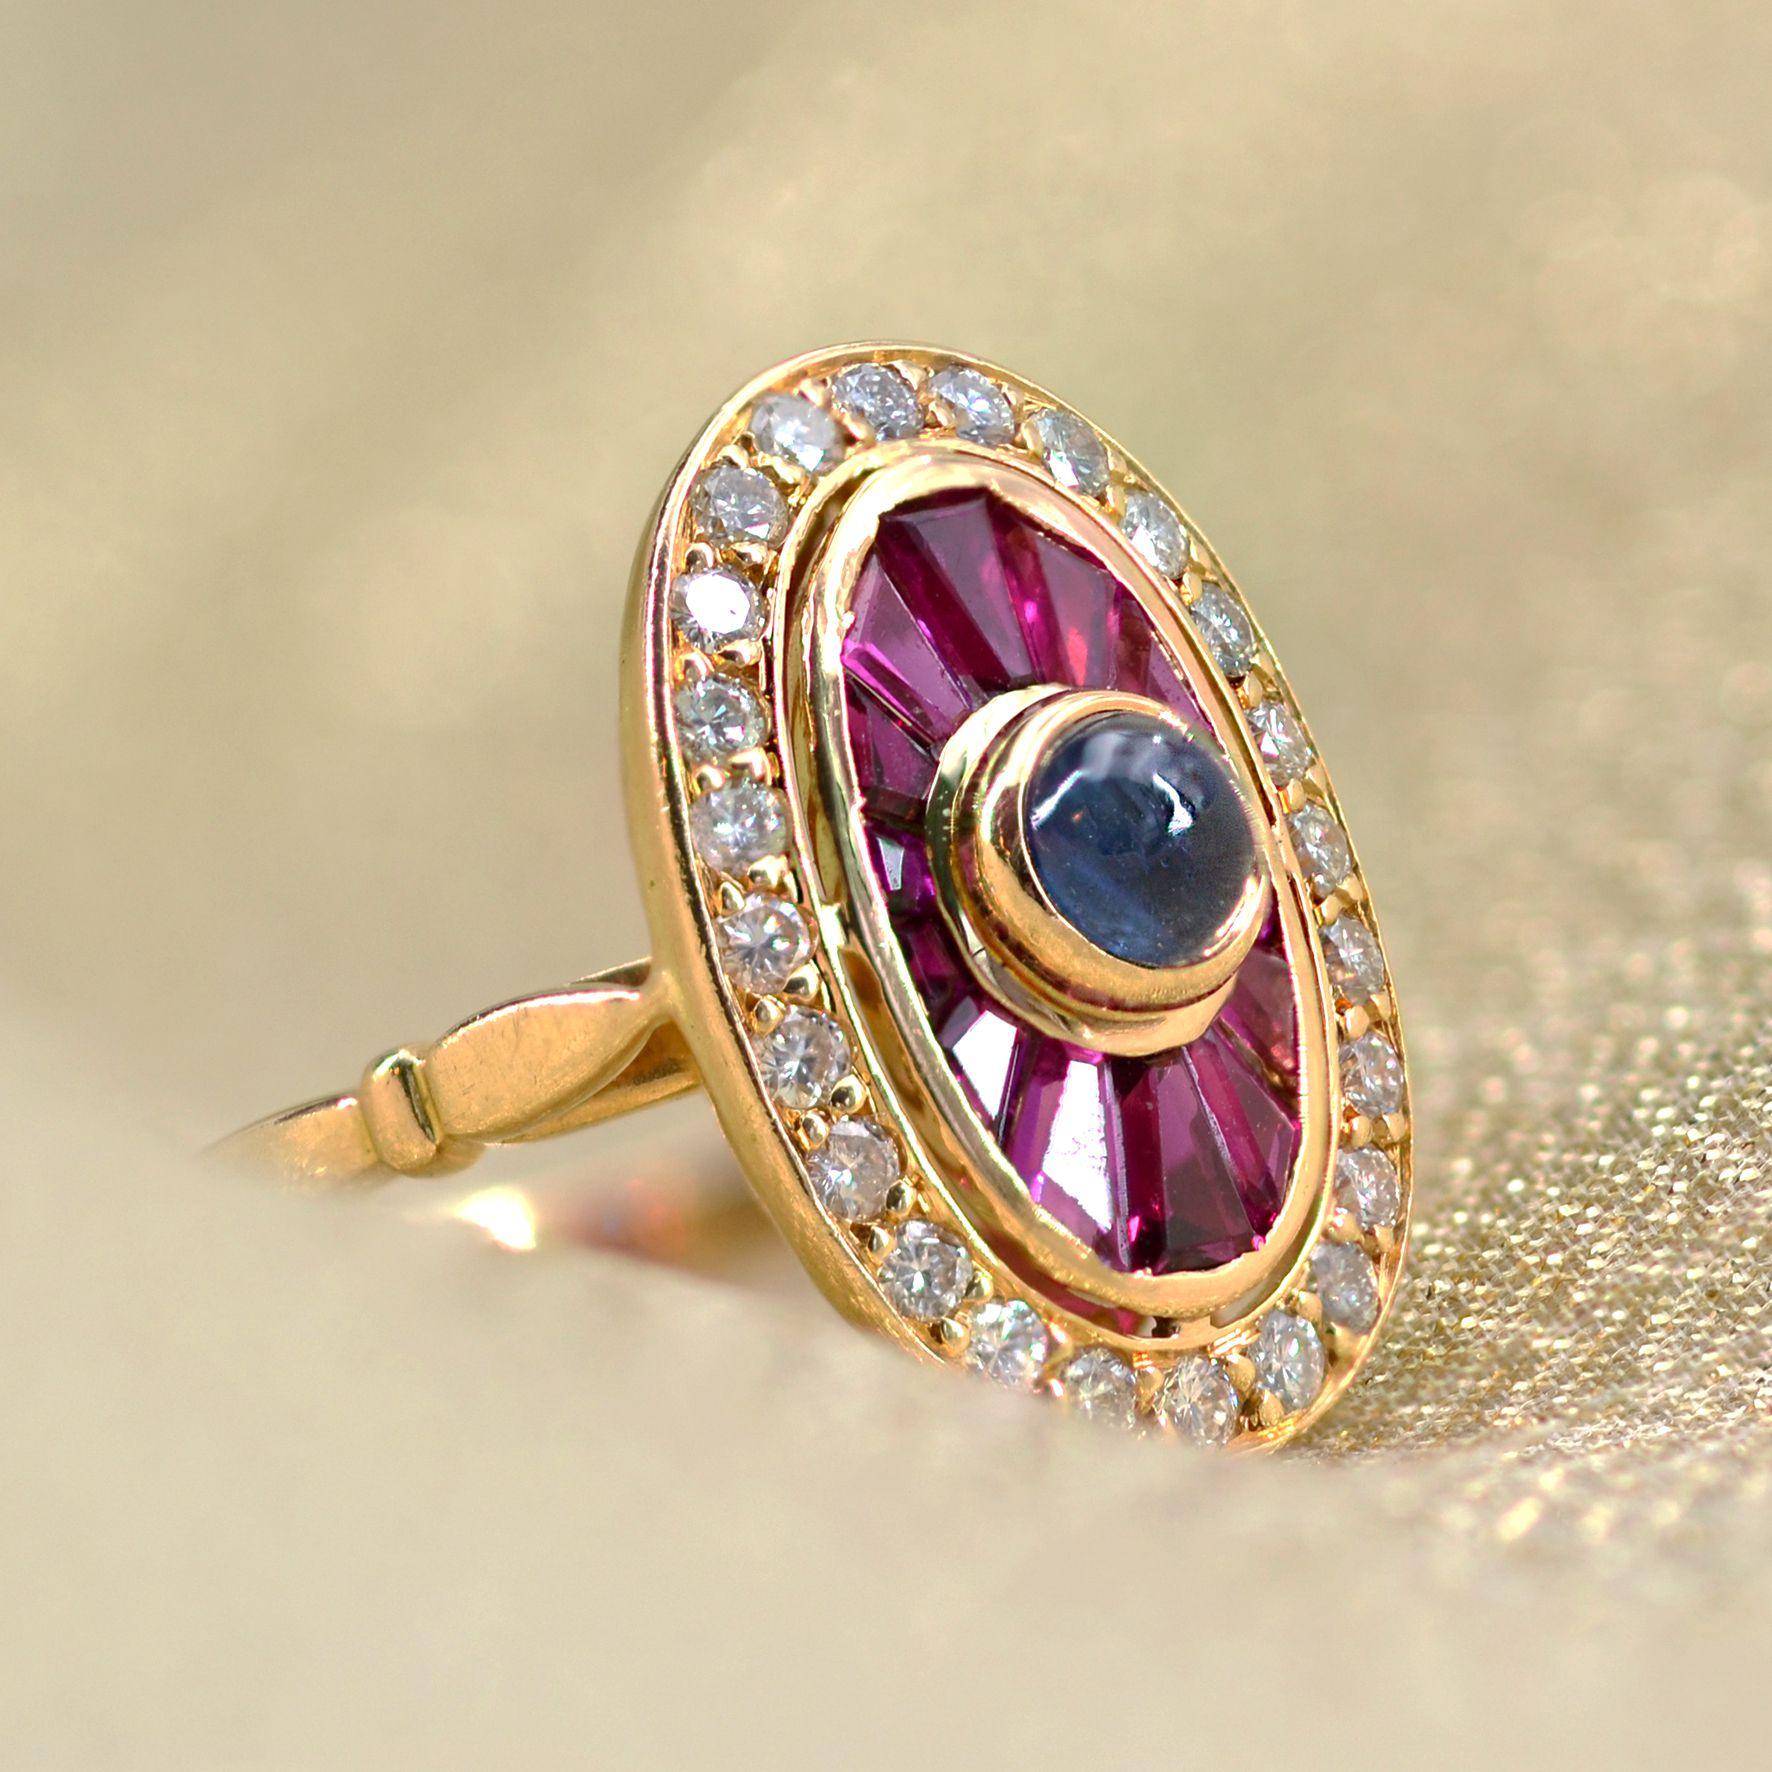 French Art Deco Style Ruby Sapphire Diamonds 18 Karat Yellow Gold Ring For Sale 4